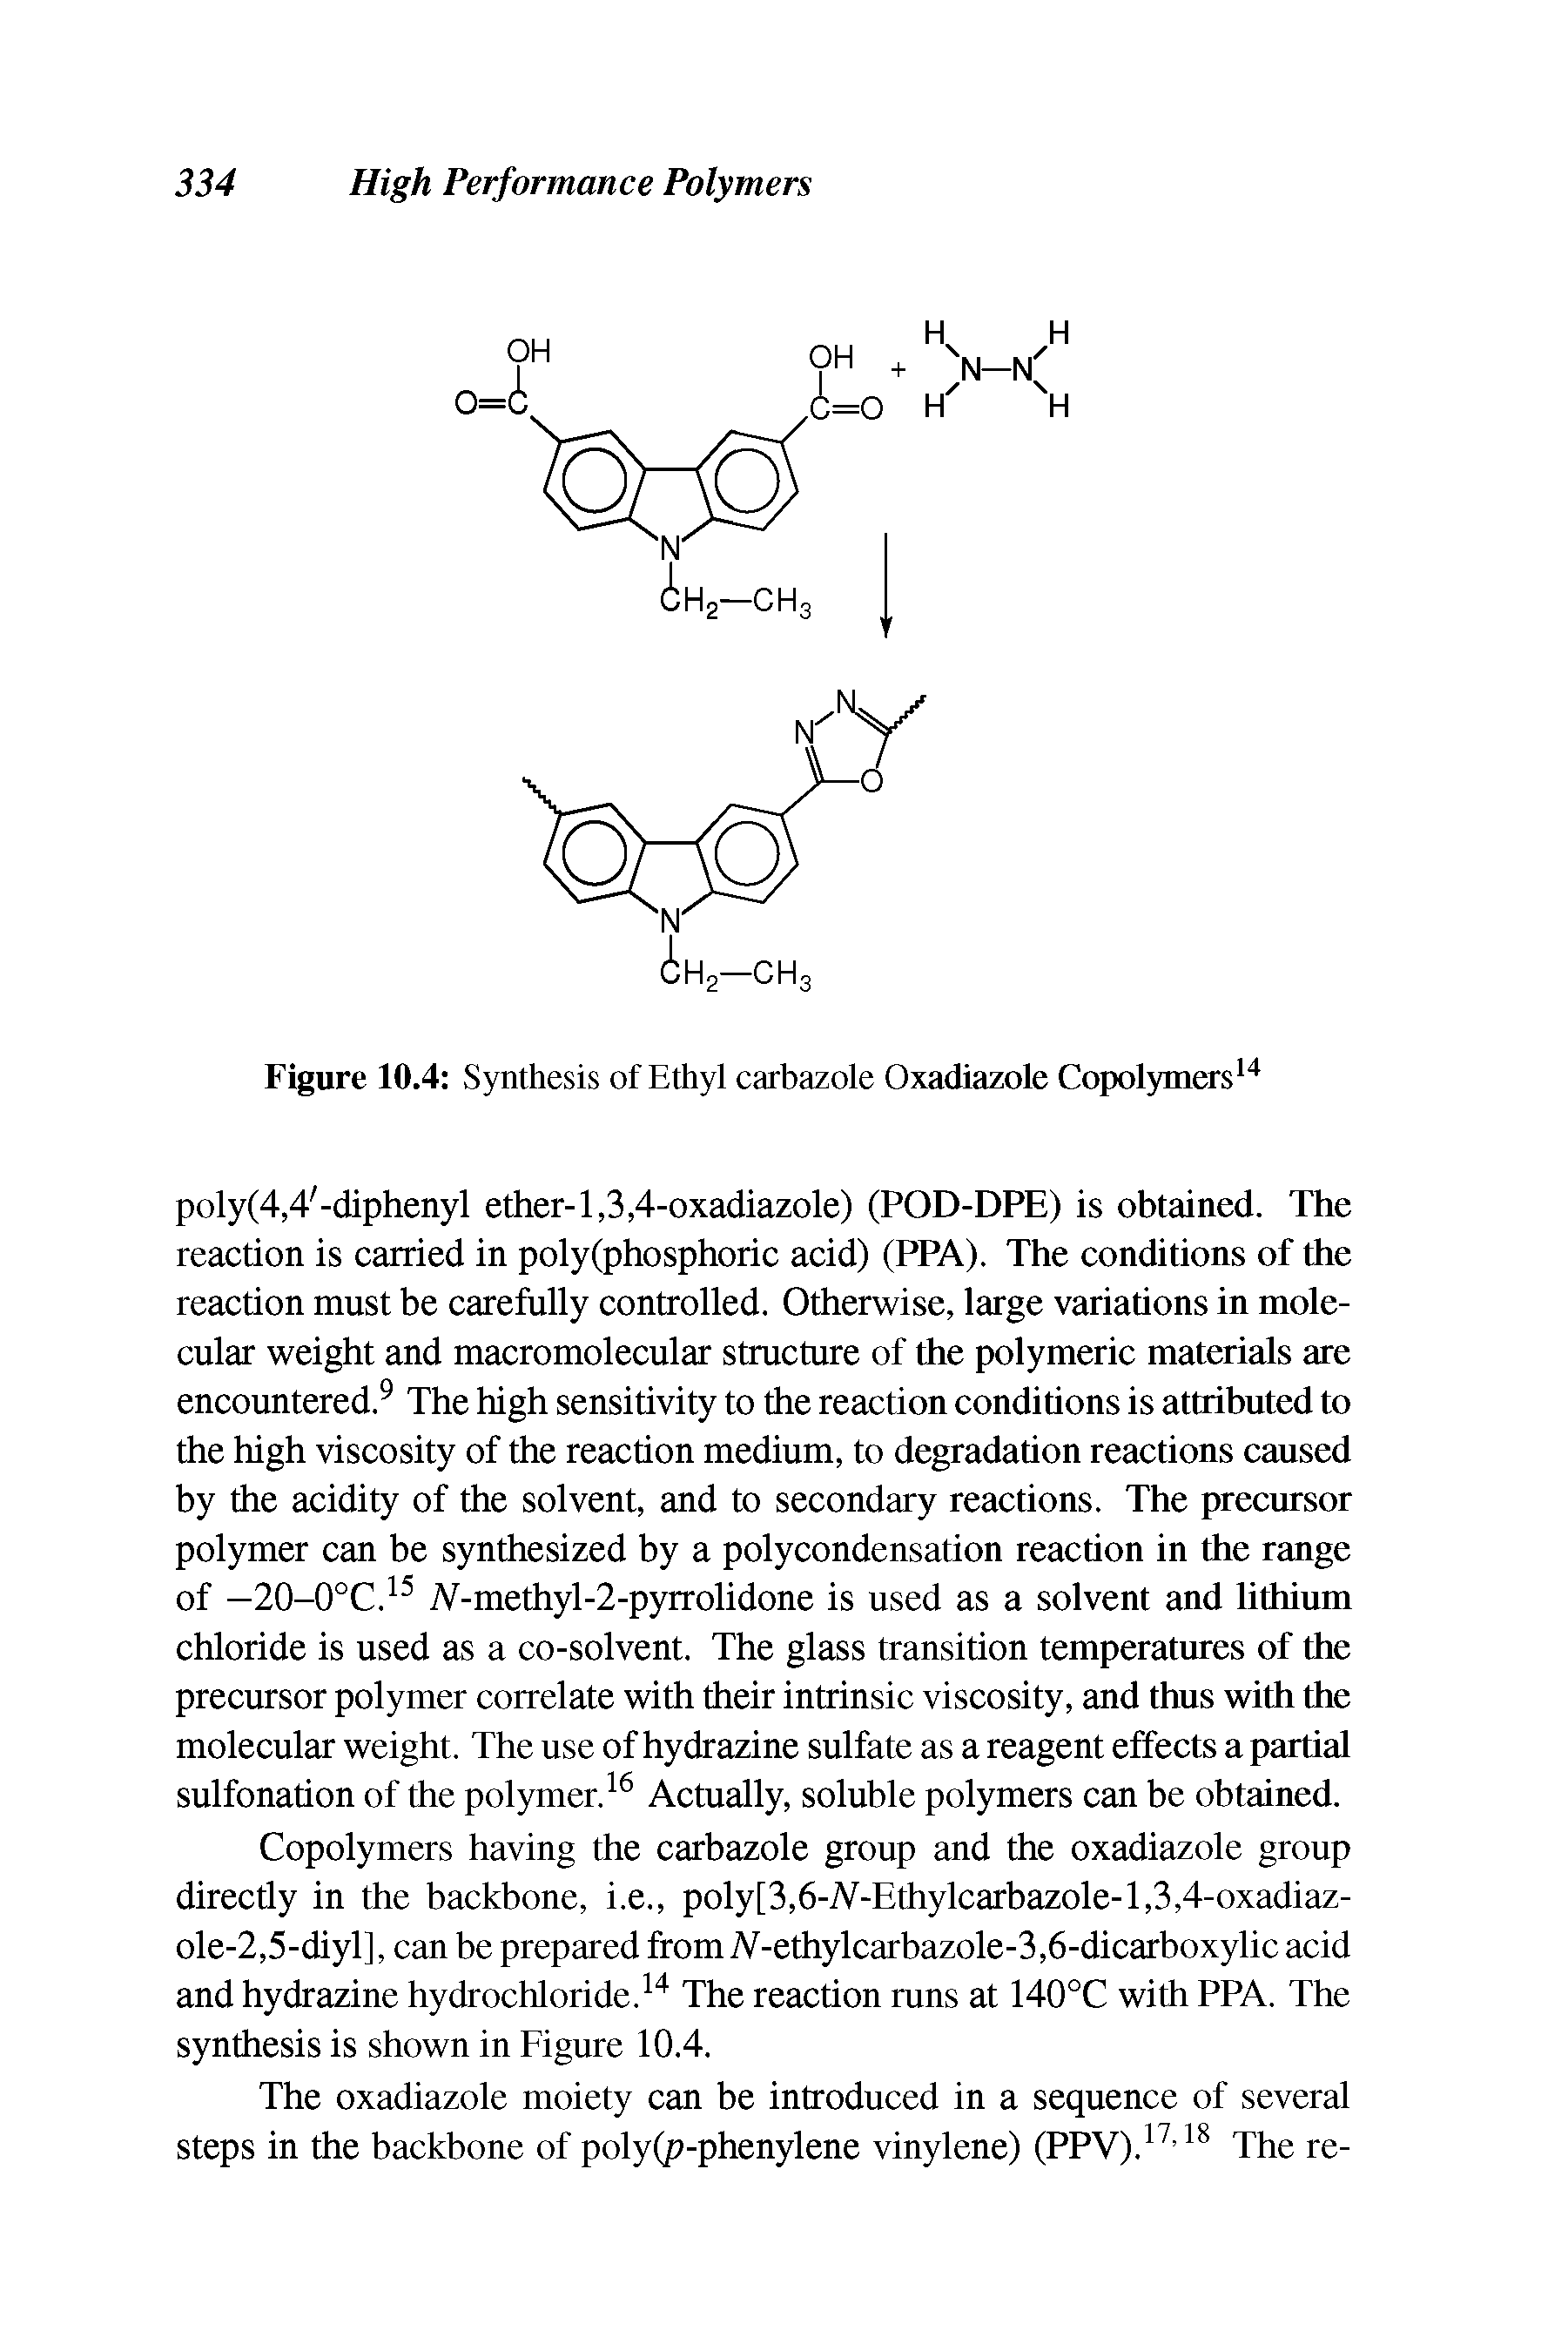 Figure 10.4 Synthesis of Ethyl carbazole Oxadiazole Copolymers...